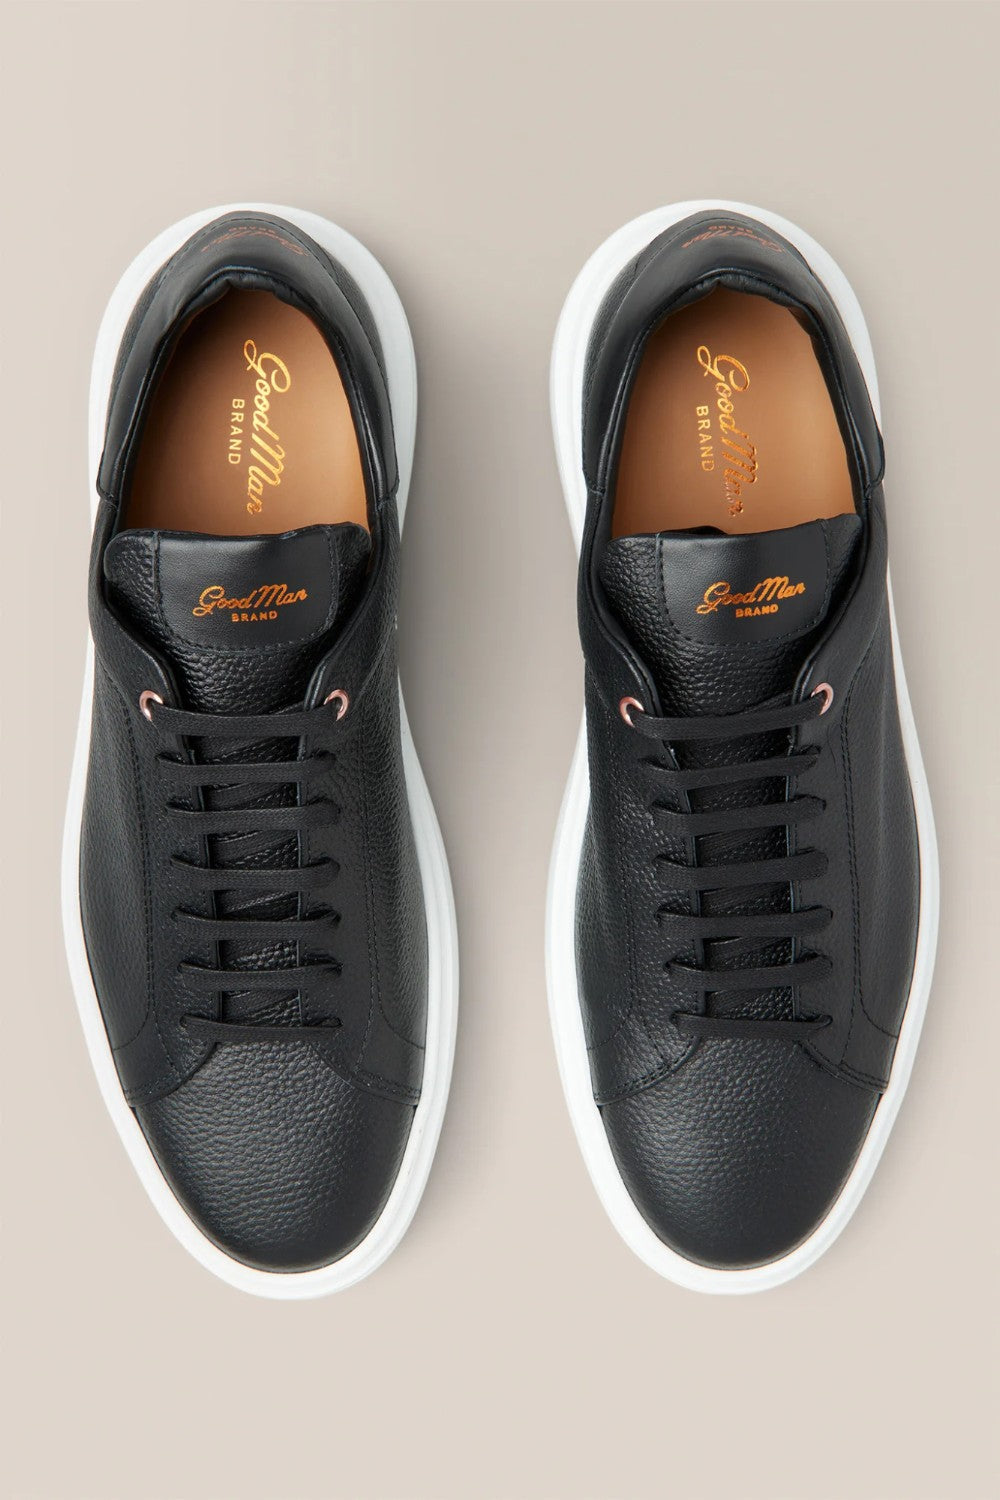 Finely pebbled leather lends subtle texture to a classic. Handcrafted in Italy with a weightless micro-lite sole, this wear-with-anything style lives up to its name and then some. 